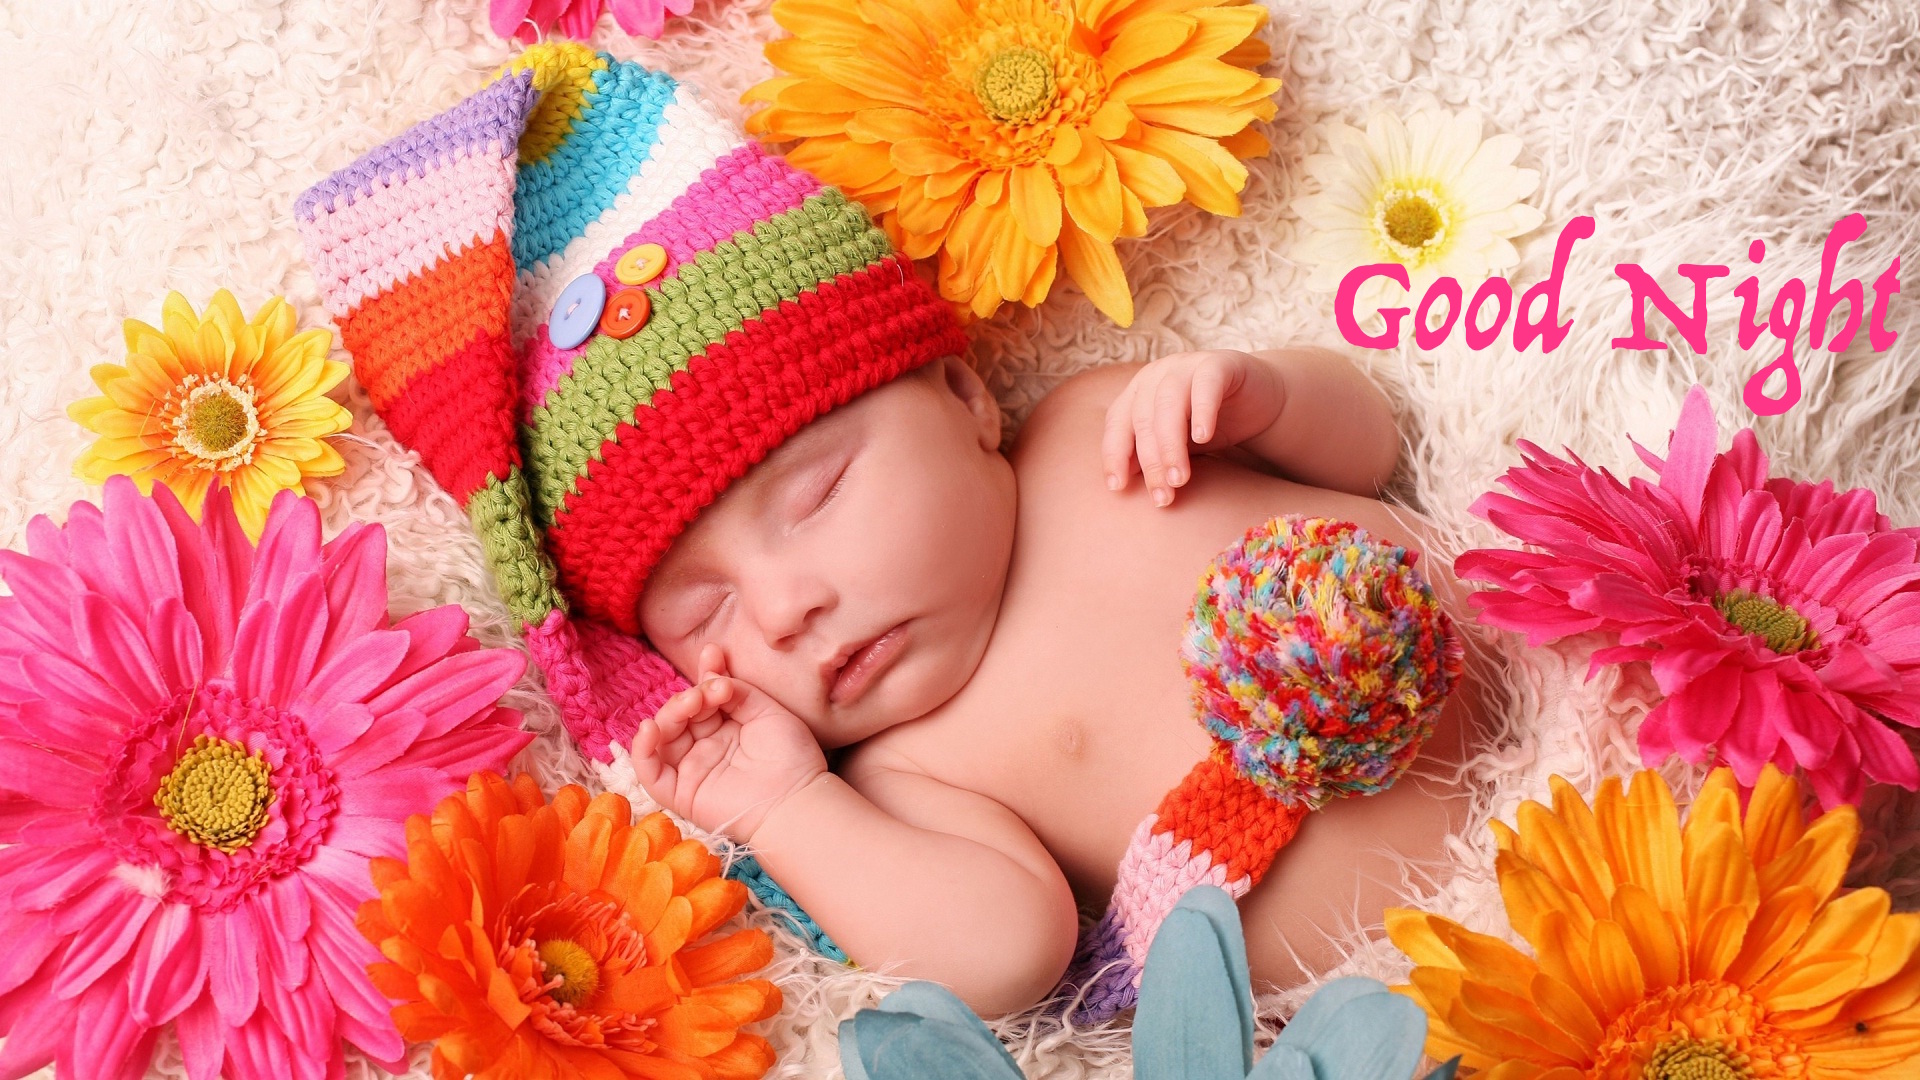 Good night baby flowers bed image